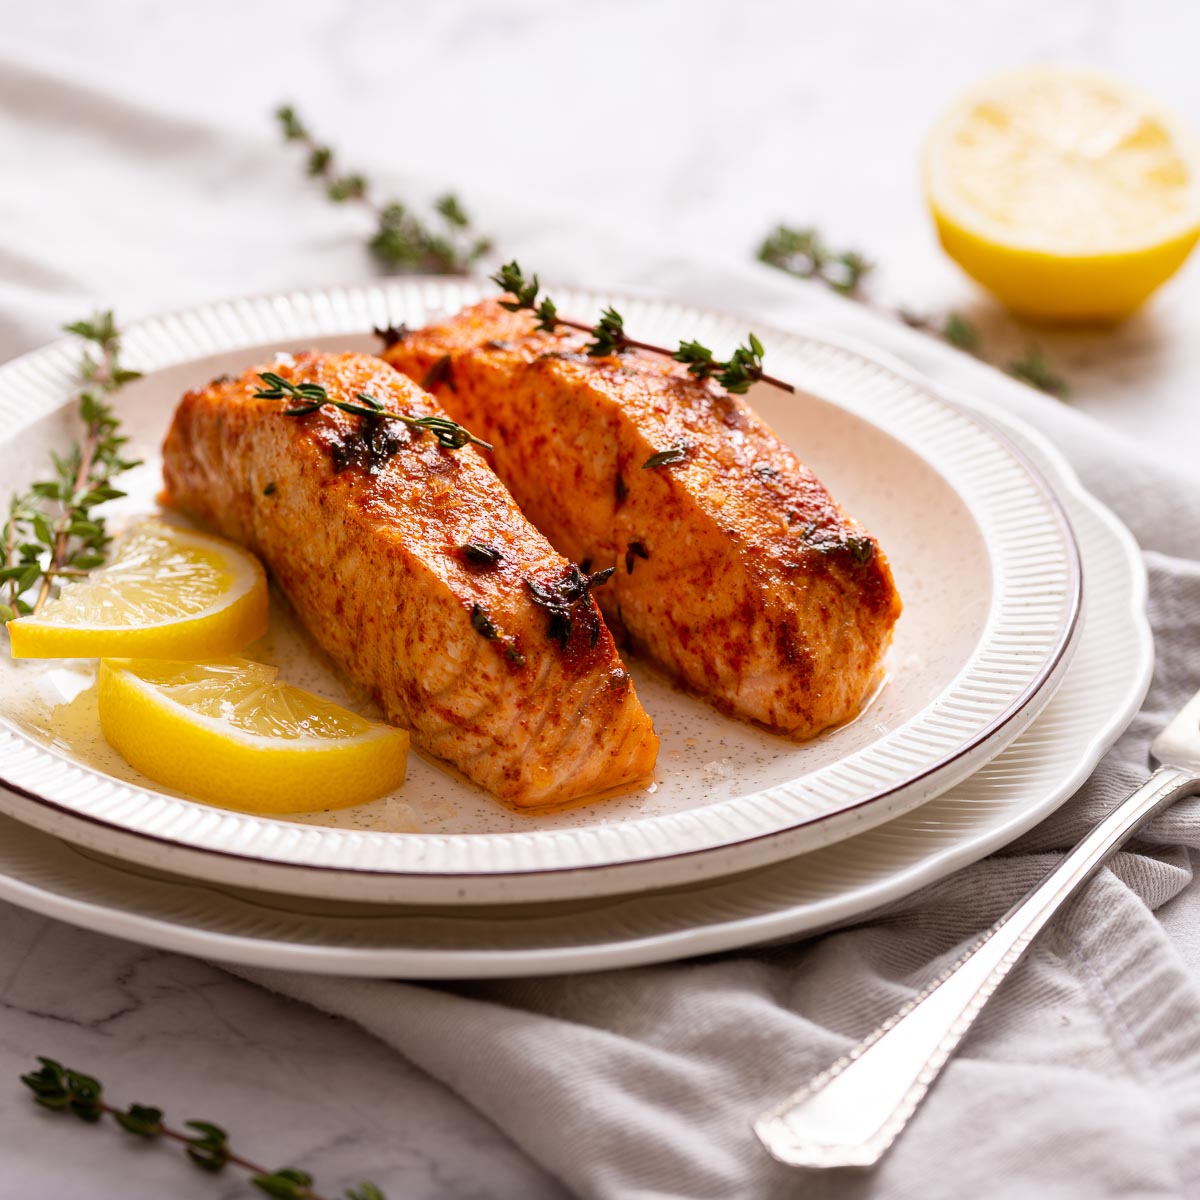 Two air fried salmon fillets on a white plate garnished with lemon slices and  thyme leaves.